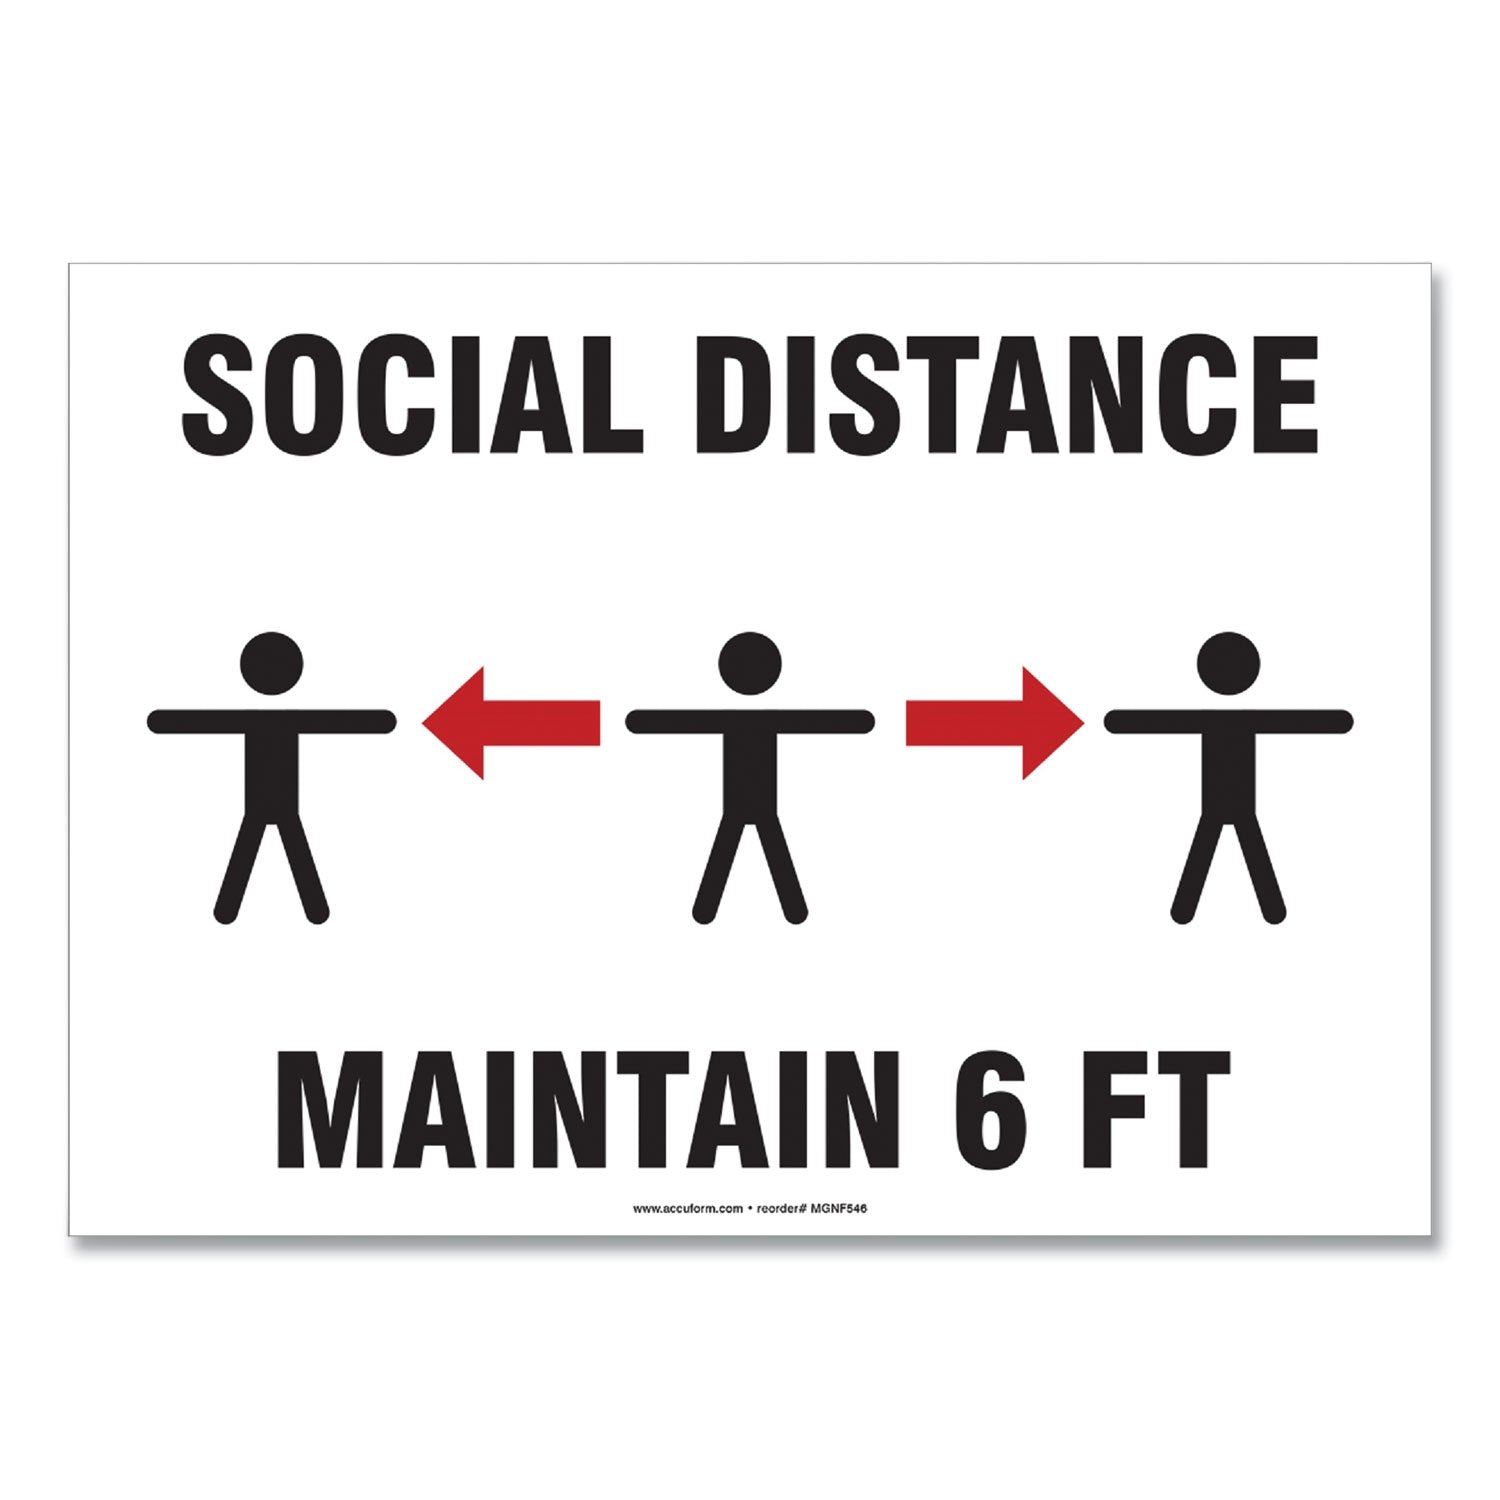 social-distance-signs-wall-10-x-7-social-distance-maintain-6-ft-3-humans-arrows-white-10-pack_gn1mgnf544vpesp - 1